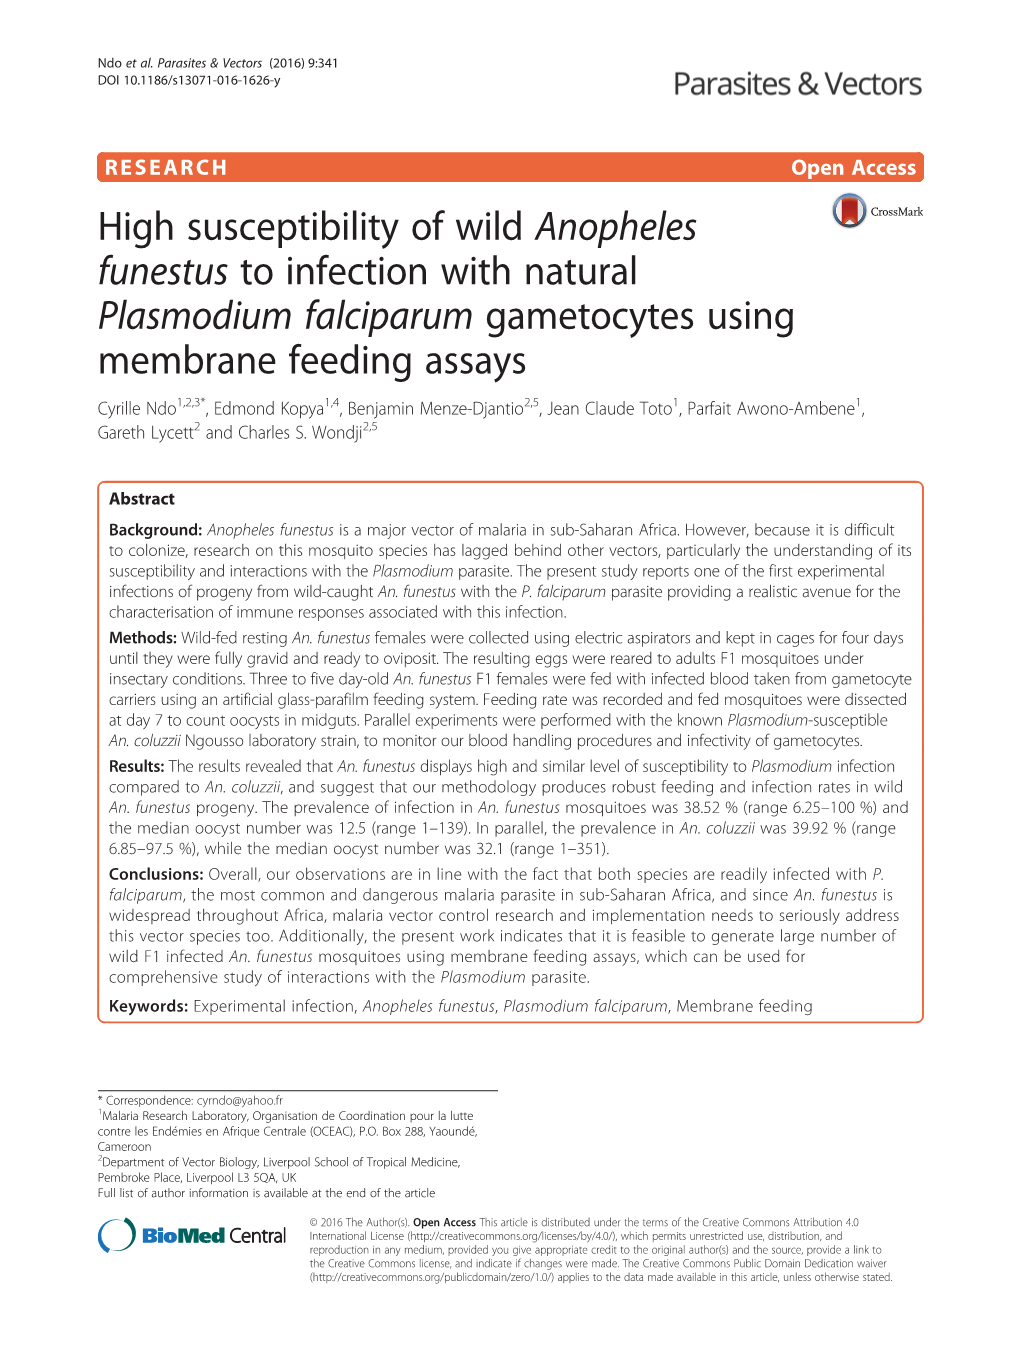 High Susceptibility of Wild Anopheles Funestus to Infection with Natural